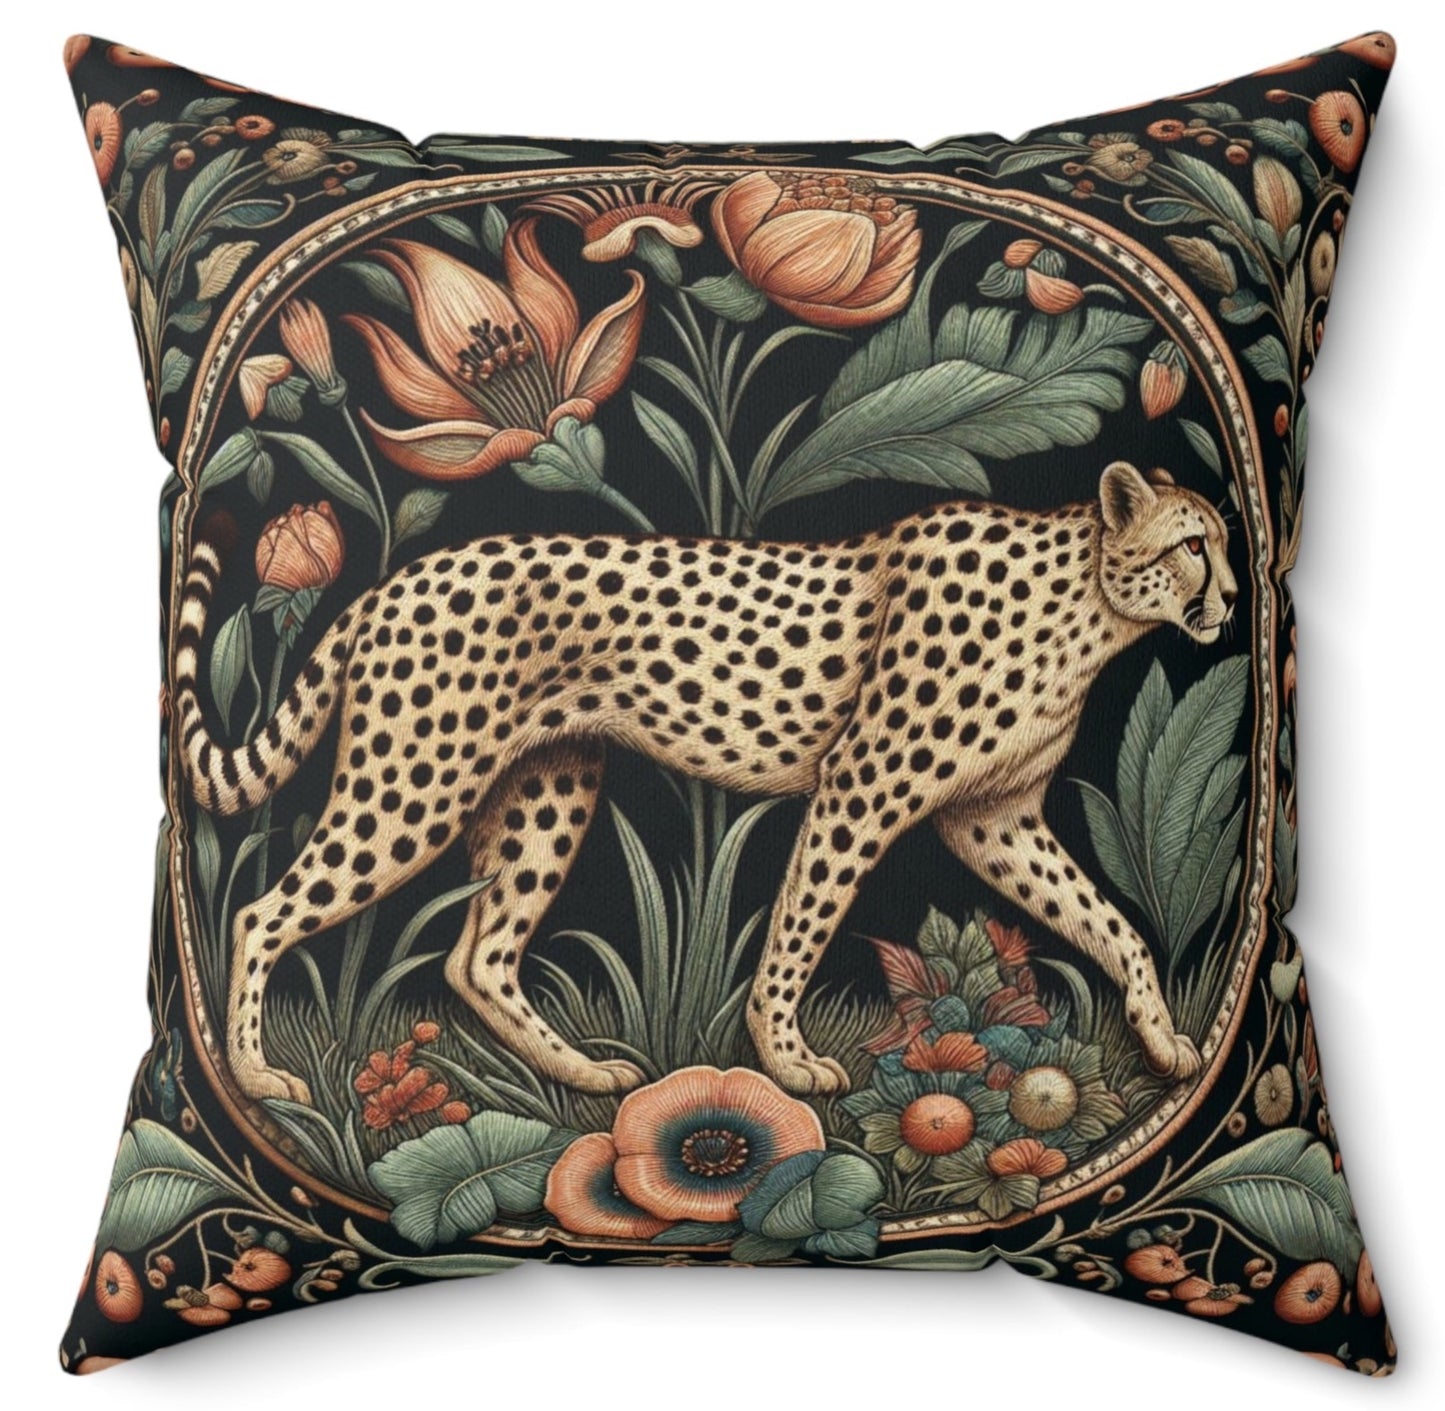 Vintage Style Throw Pillow Botanical Floral Eclectic Cheetah Maximalist Polyester Decorative Cushion Square Cover